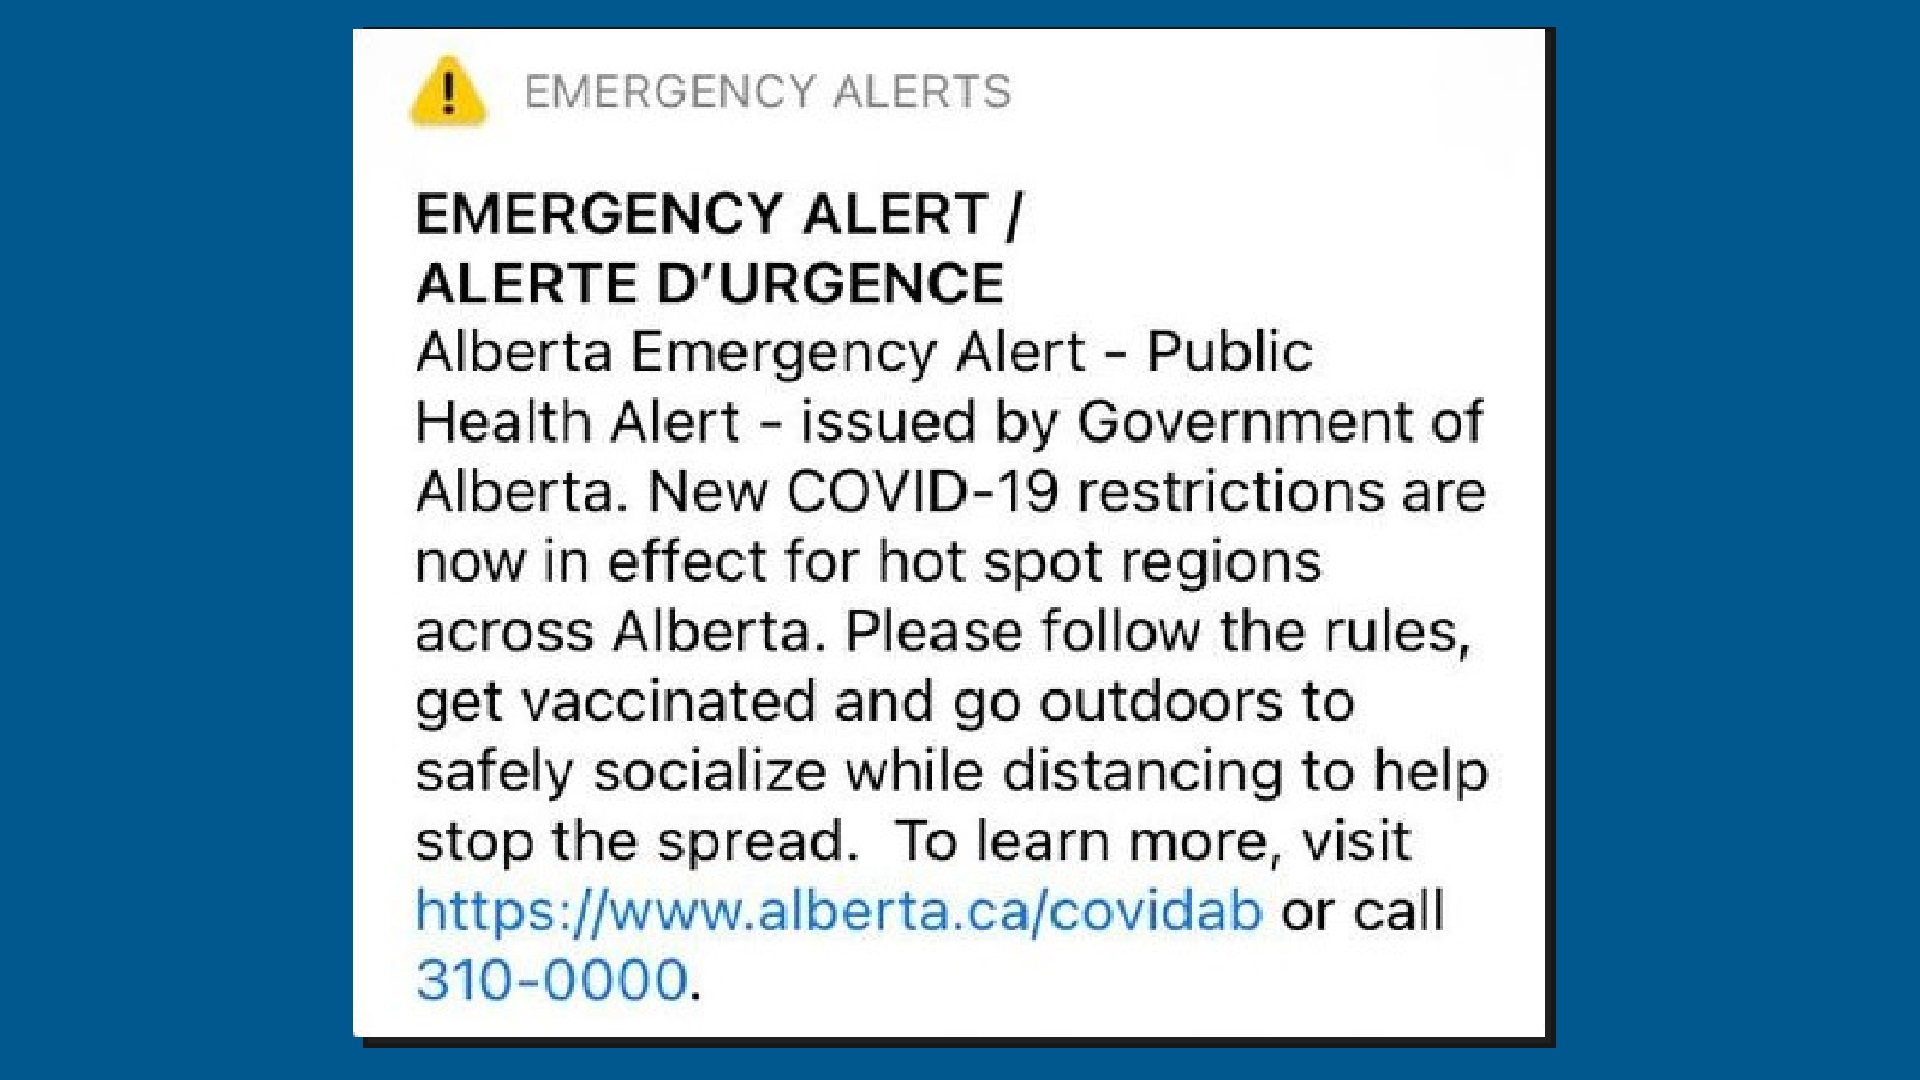 Alberta promptly issues emergency alert 14 months later - The Beaverton